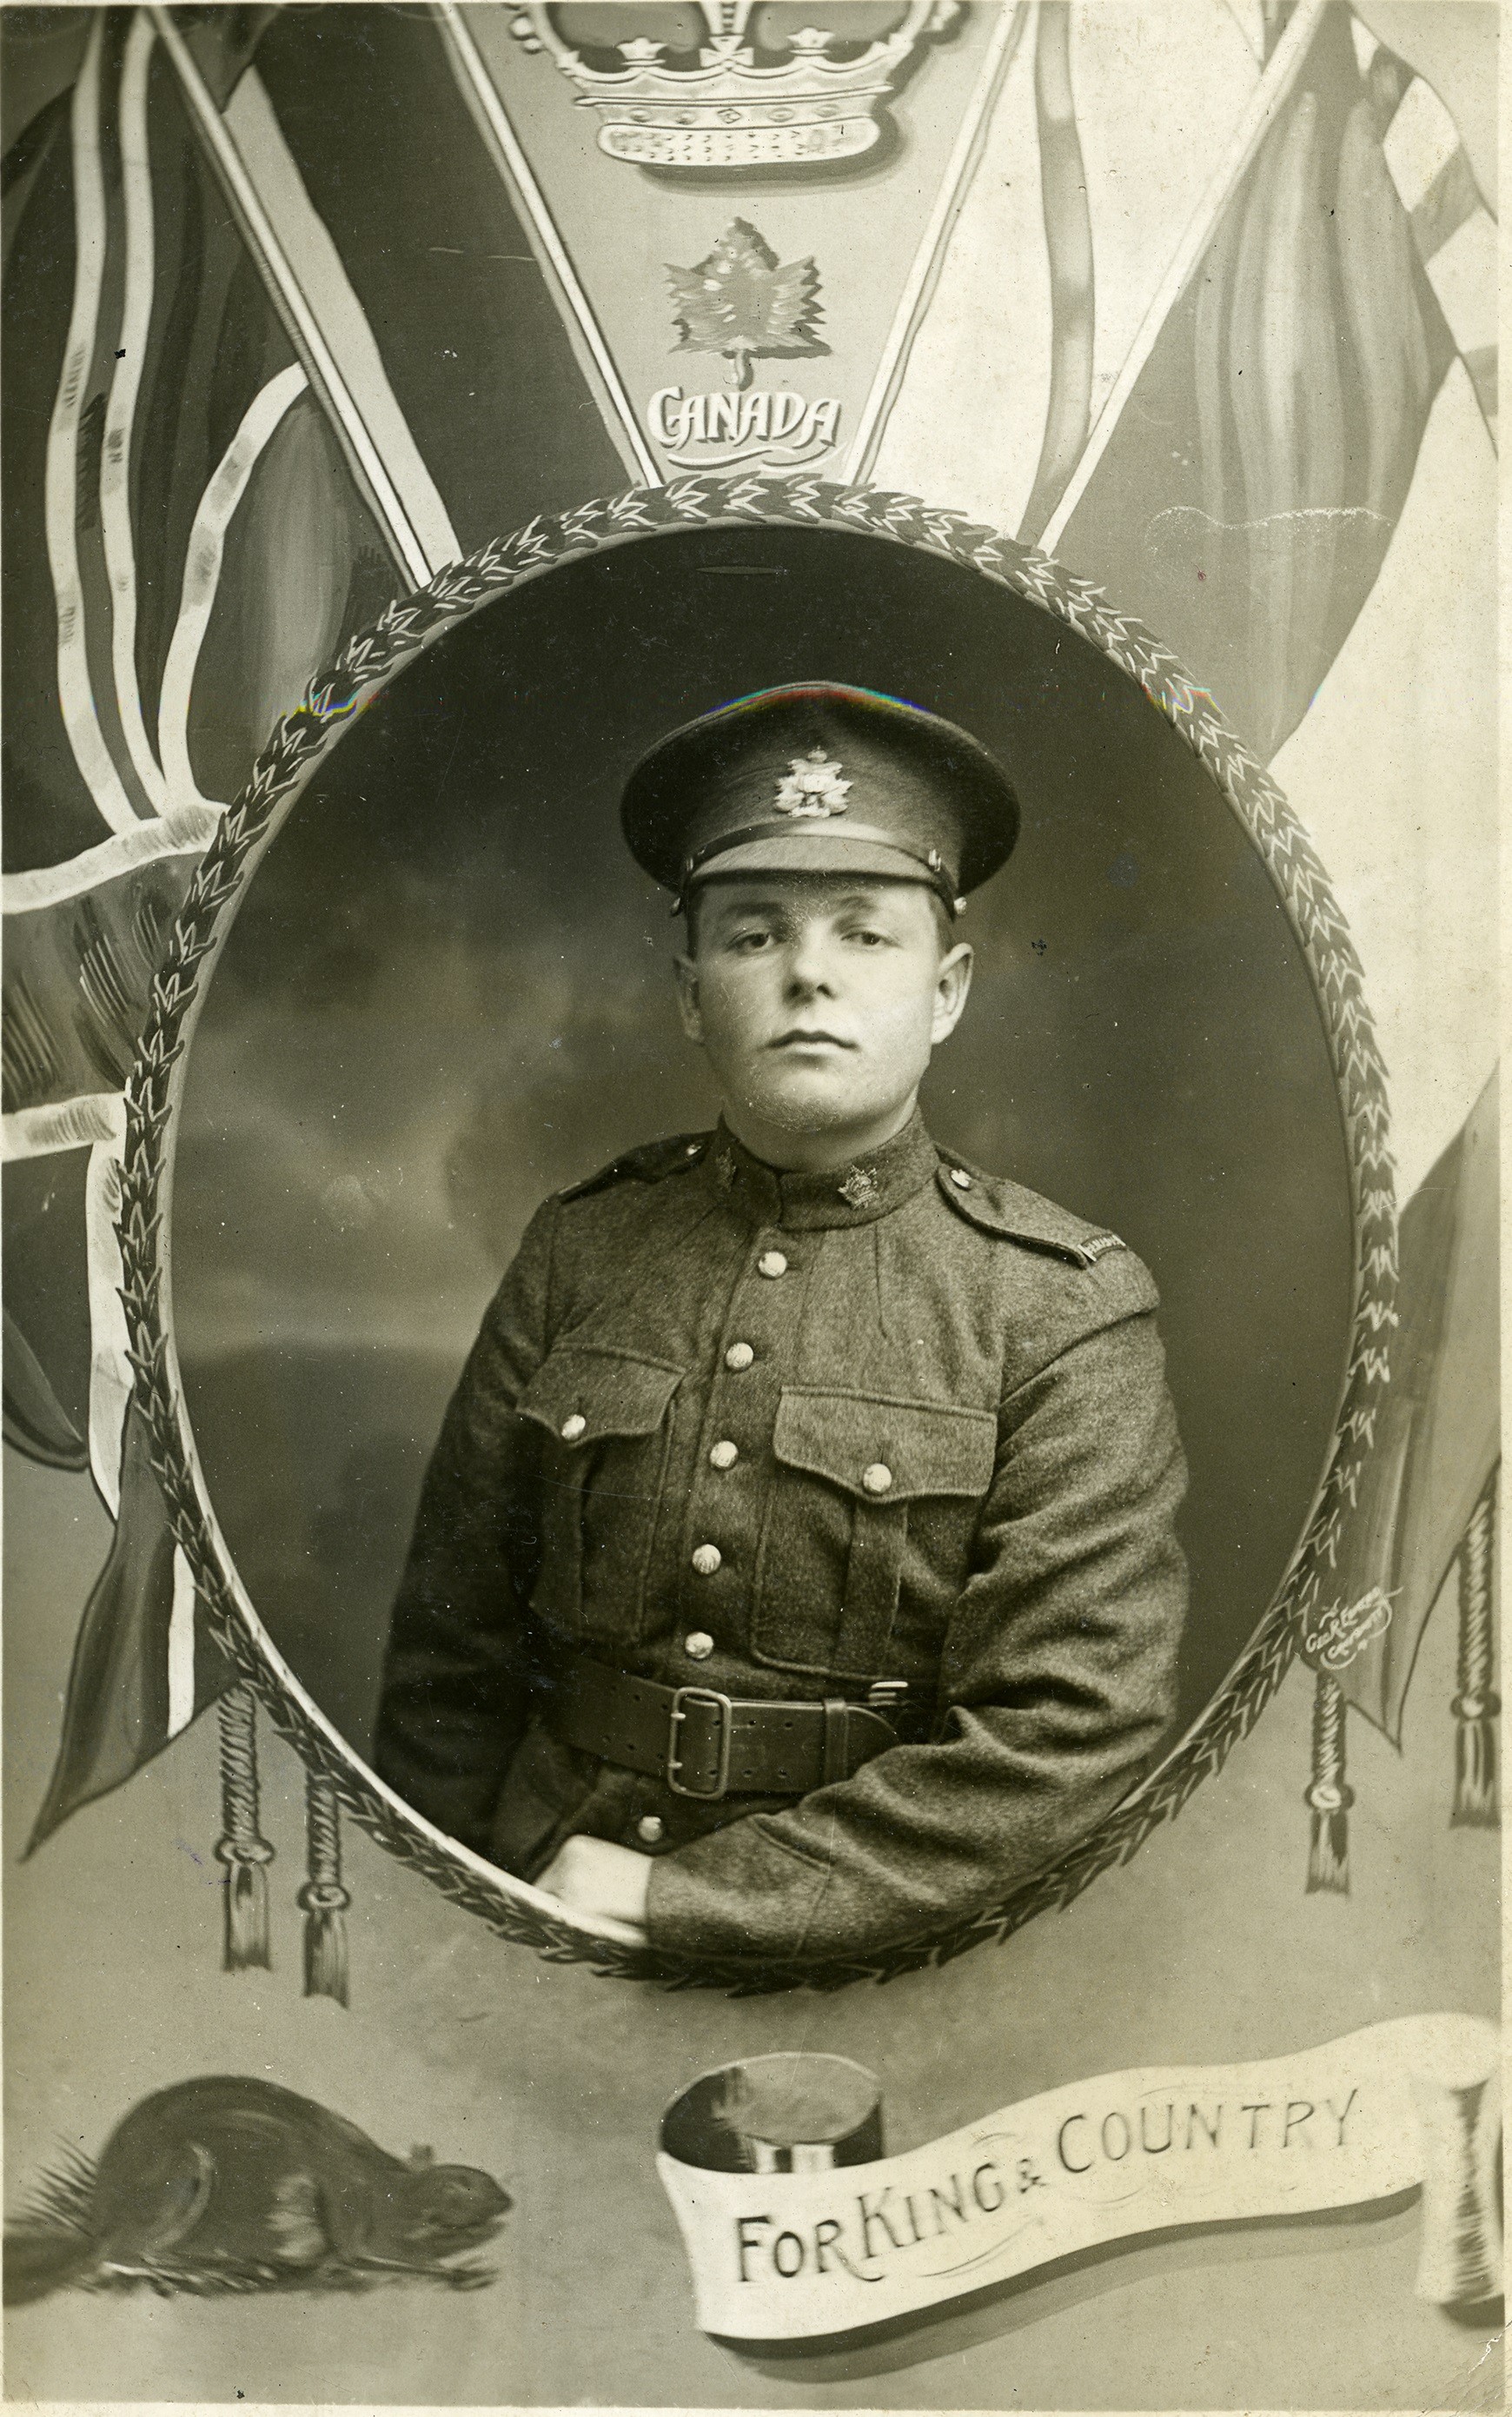 BRAVERY - Pictured here is John Richards. He enlisted with the 187th Battalion and later transferred to the 50 Battalion overseas. He was erroneously reported as missing and believed killed in action not long after his family got word that his brother Will Richards had been killed at the Battle of Vimy Ridge.